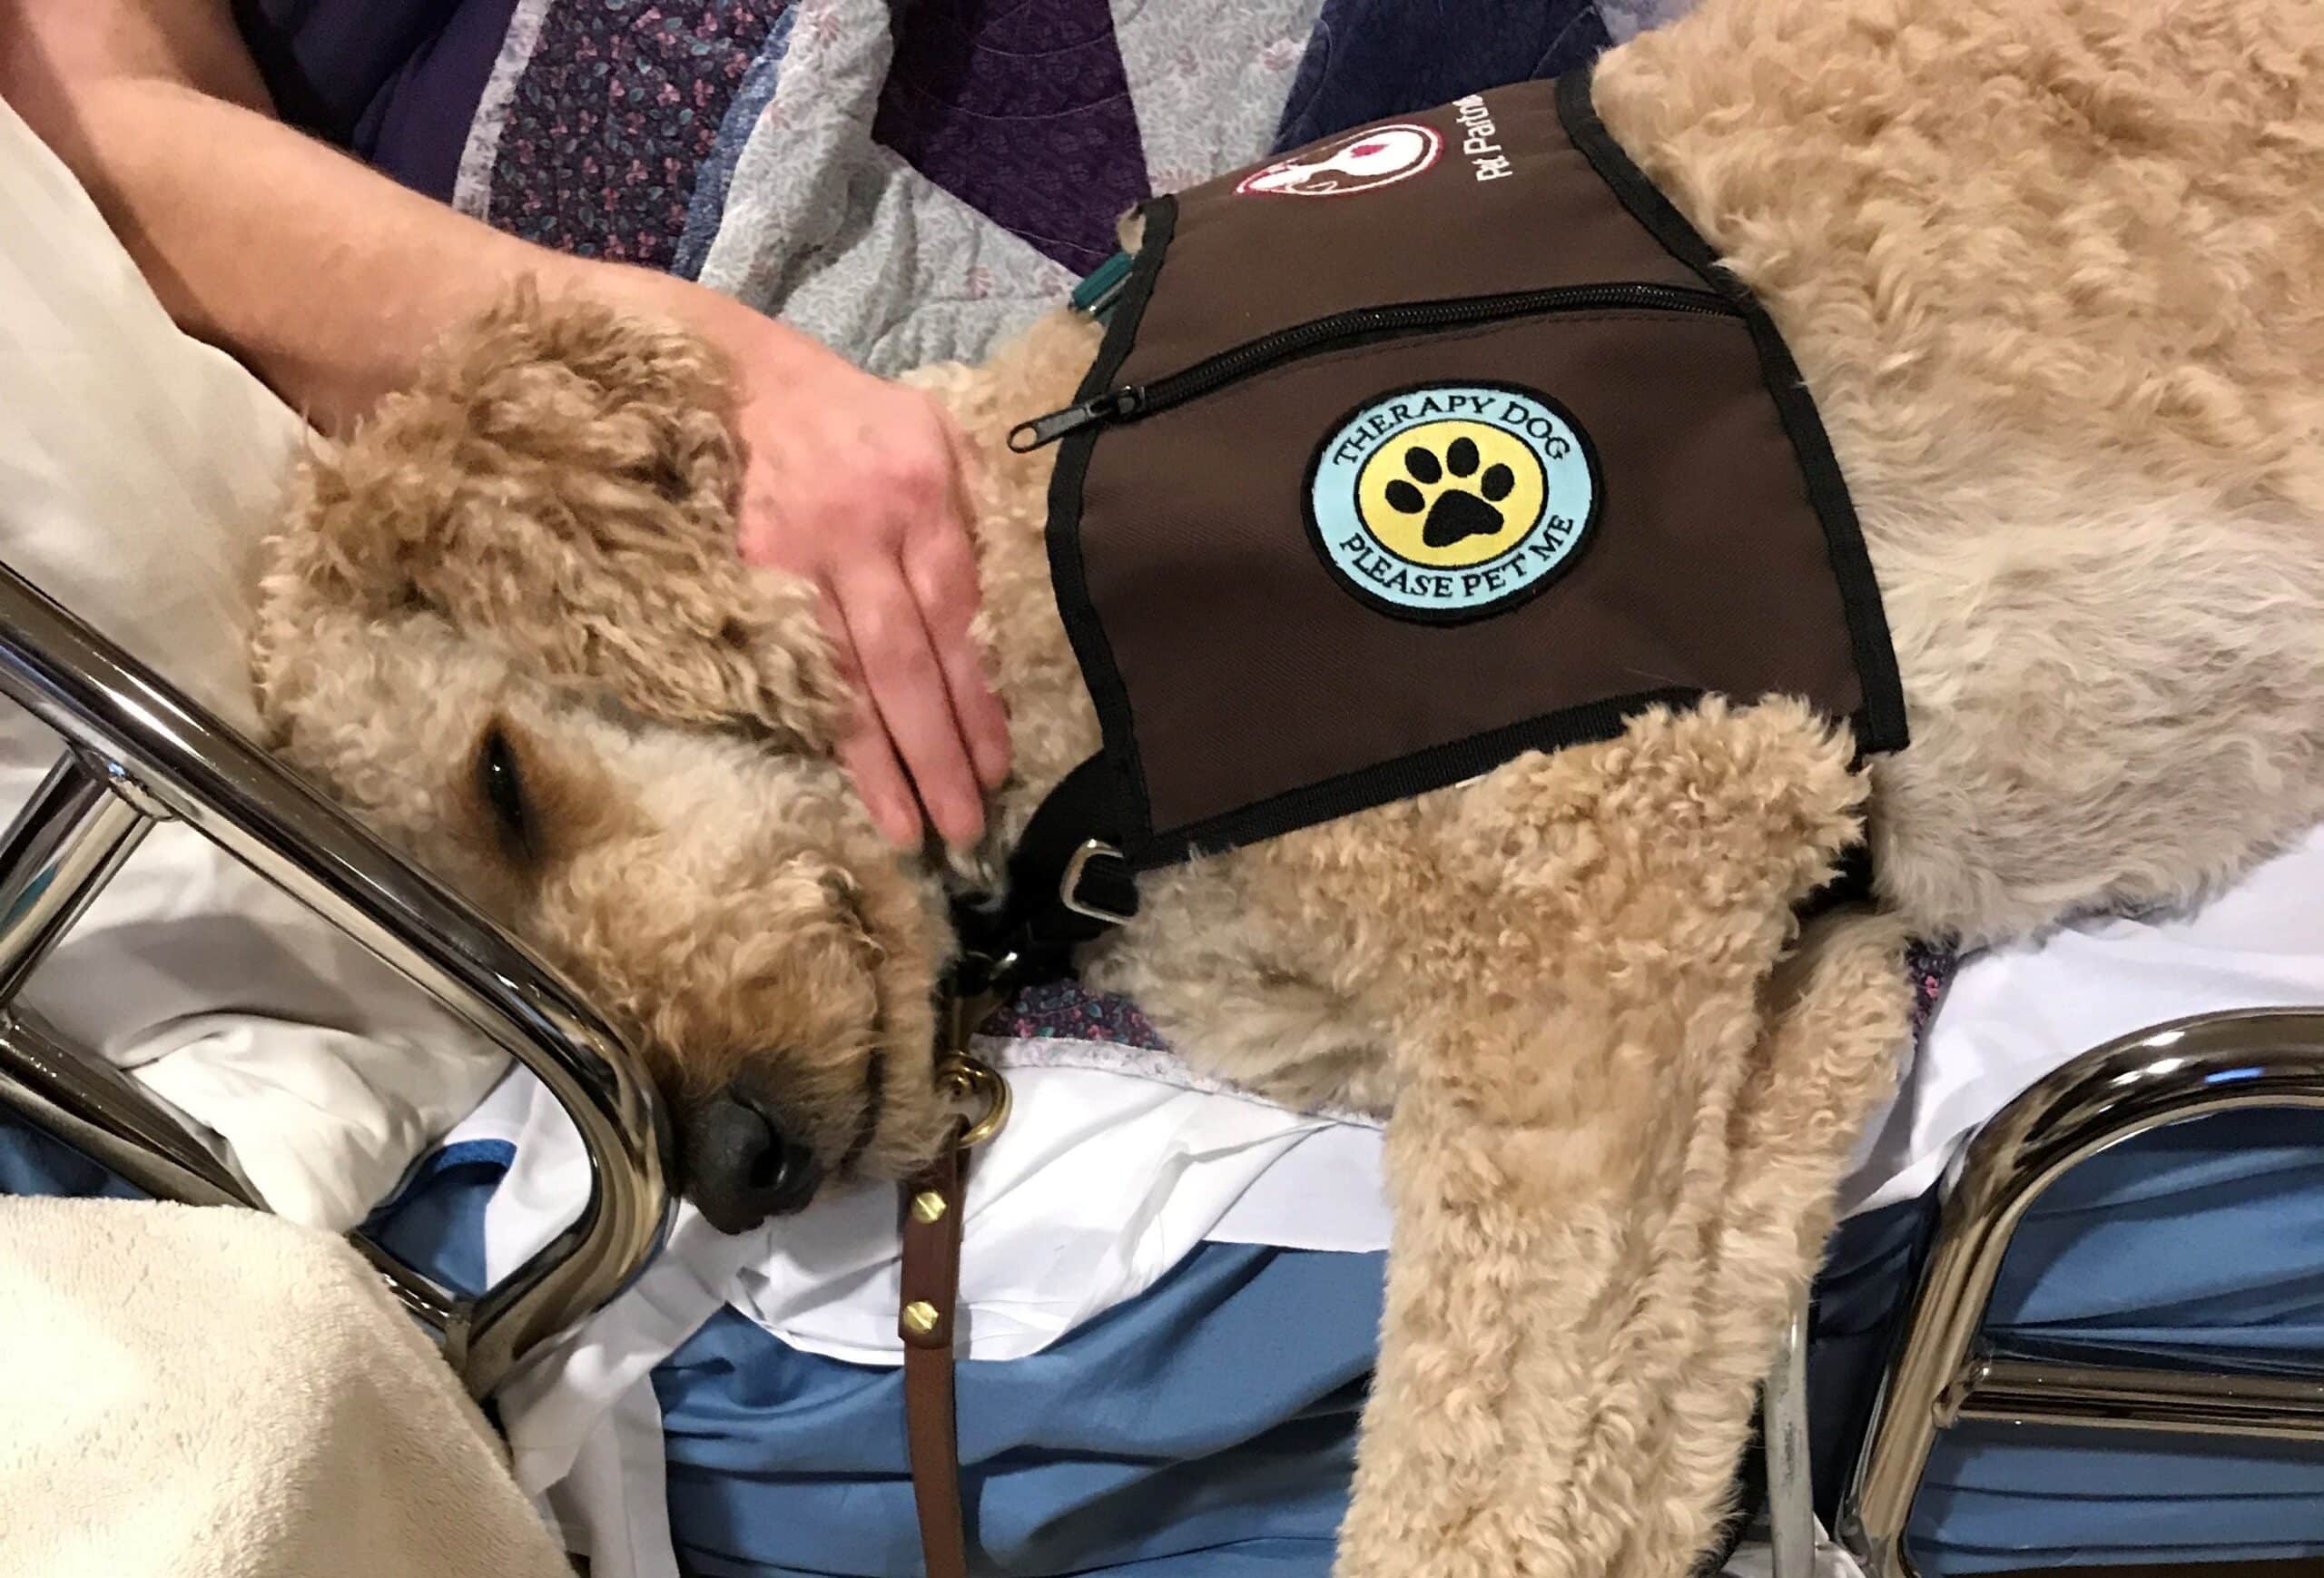 A goldendoodle therapy dog lies on a hospice patient's bed, with the patient's hand resting on the dog